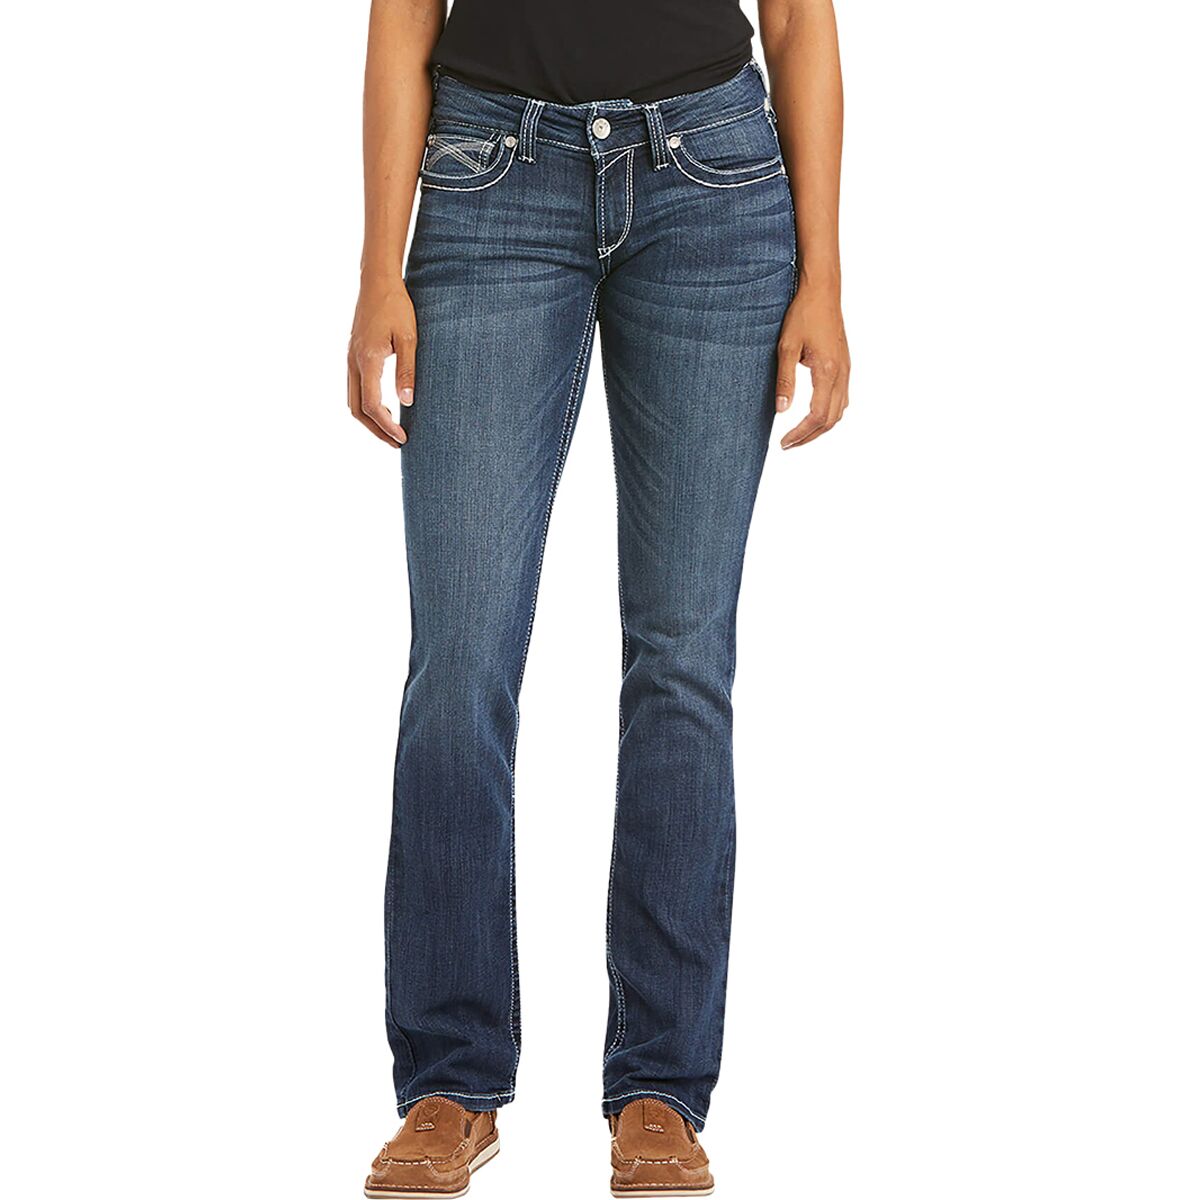 Ariat REAL MidRise Ivy Stackable StraightLeg Jean - Women's